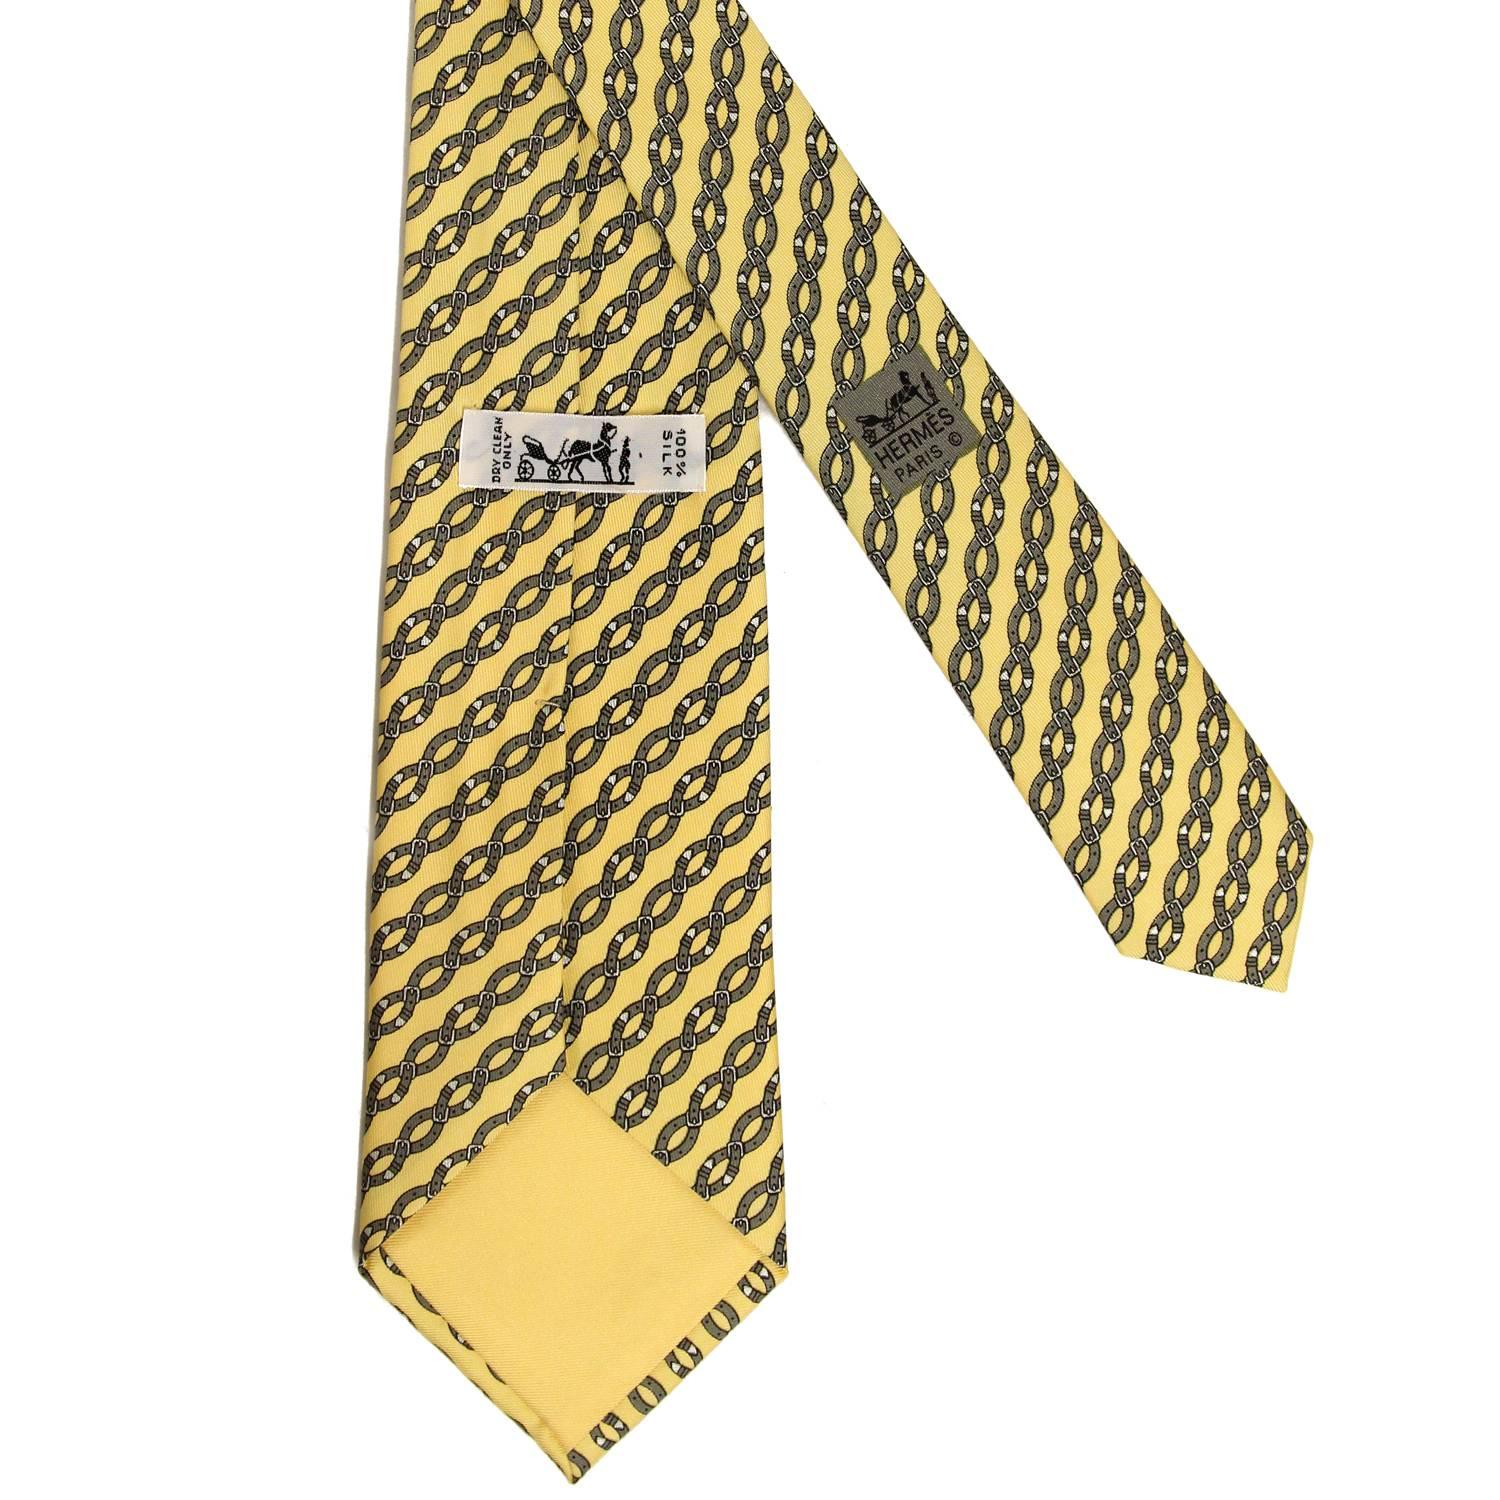 Lively Hermès 100% silk printed tie in yellow and grey belts pattern. The item is vintage, it was produced in the 1990s and is in excellent conditions, flawless. Width: 8
